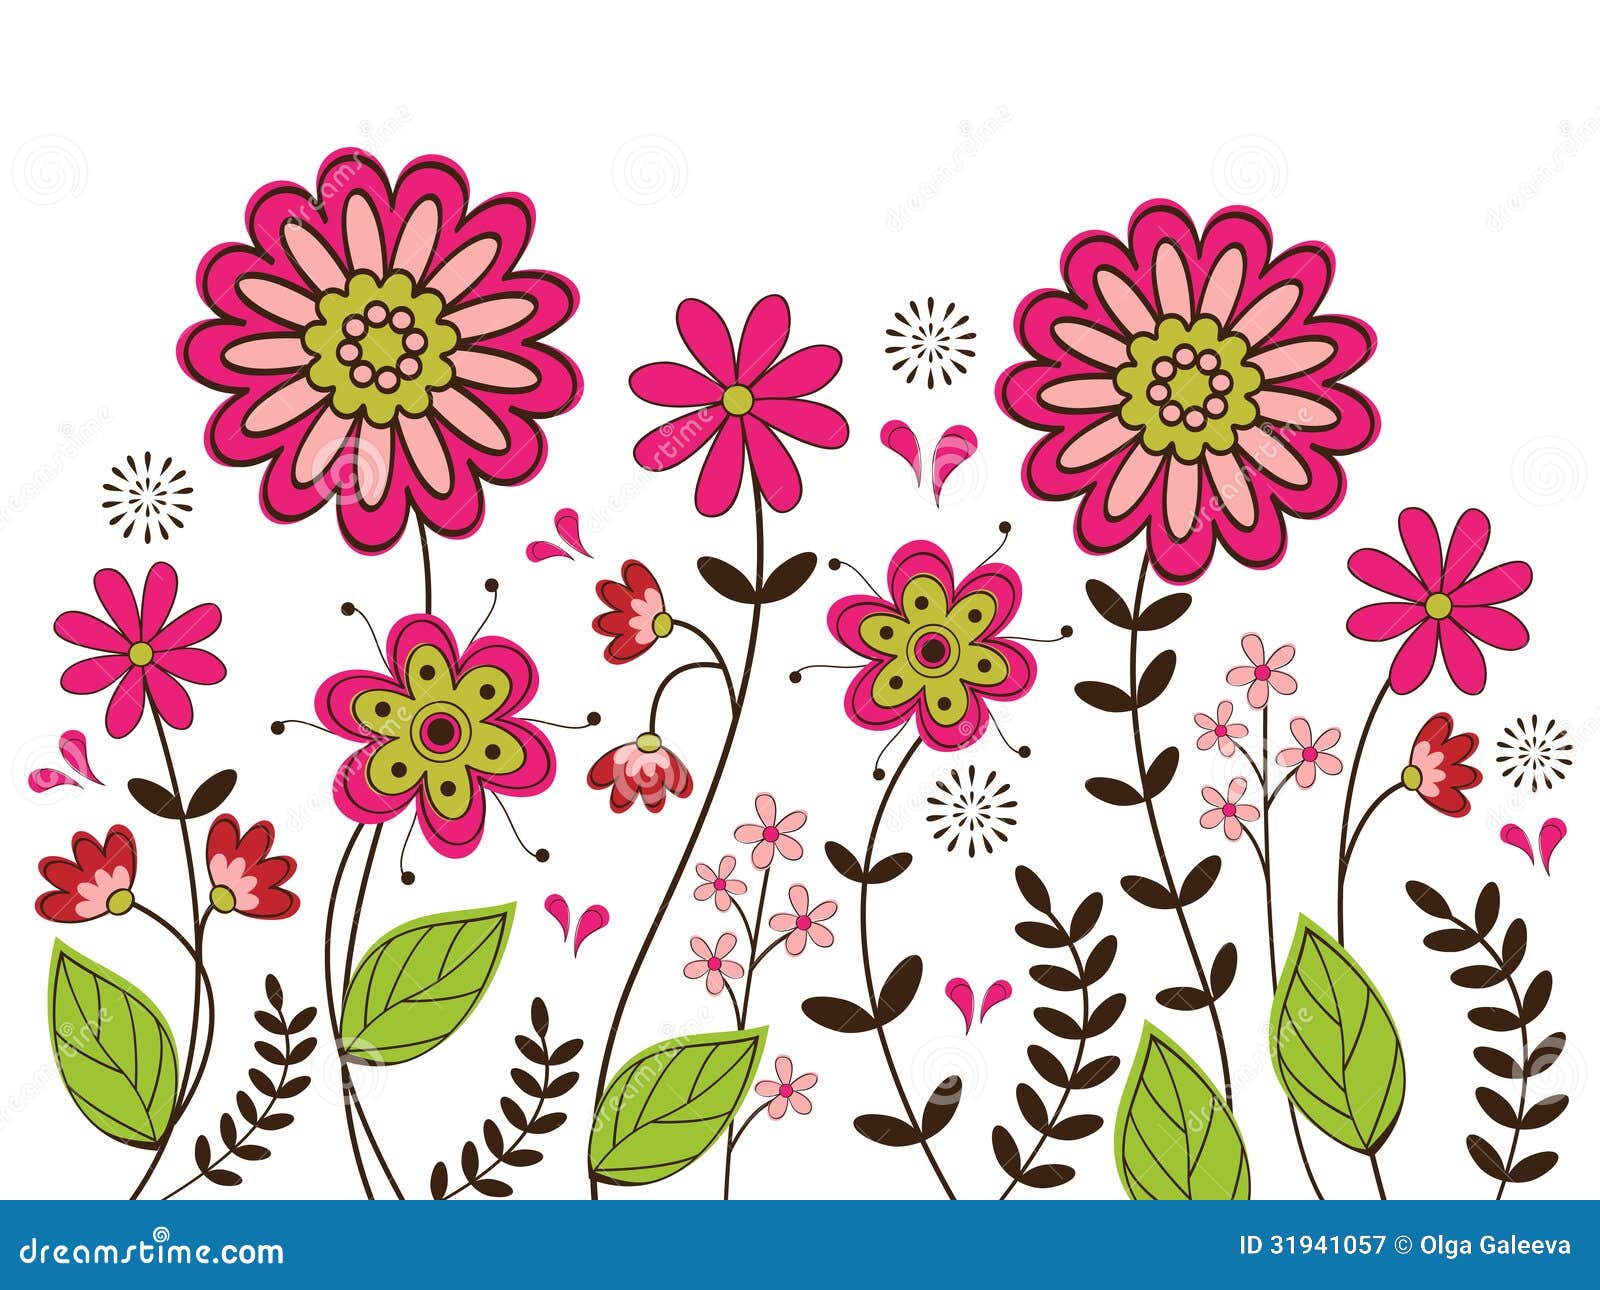 Cute Floral Backgrounds Pink flowers stock vector illustration of yellow flower